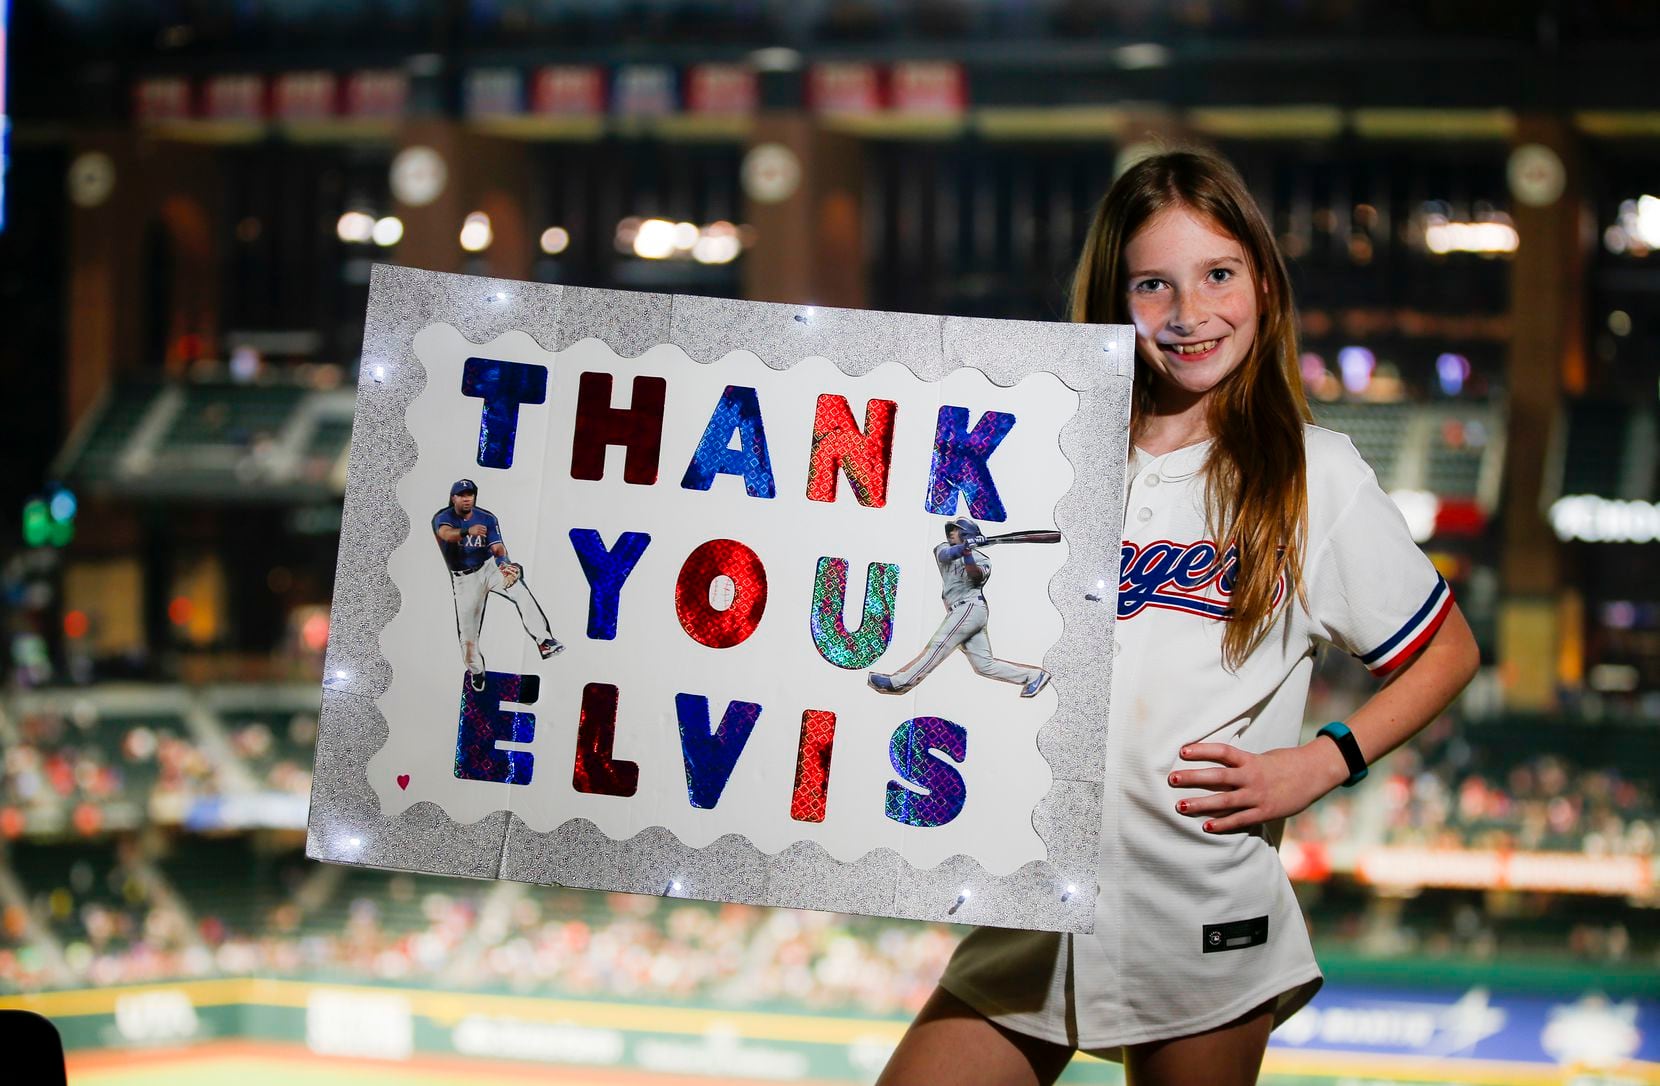 Emma Briceno, 10, a Elvis Andrus fan, poses for a photo during a baseball game between the...